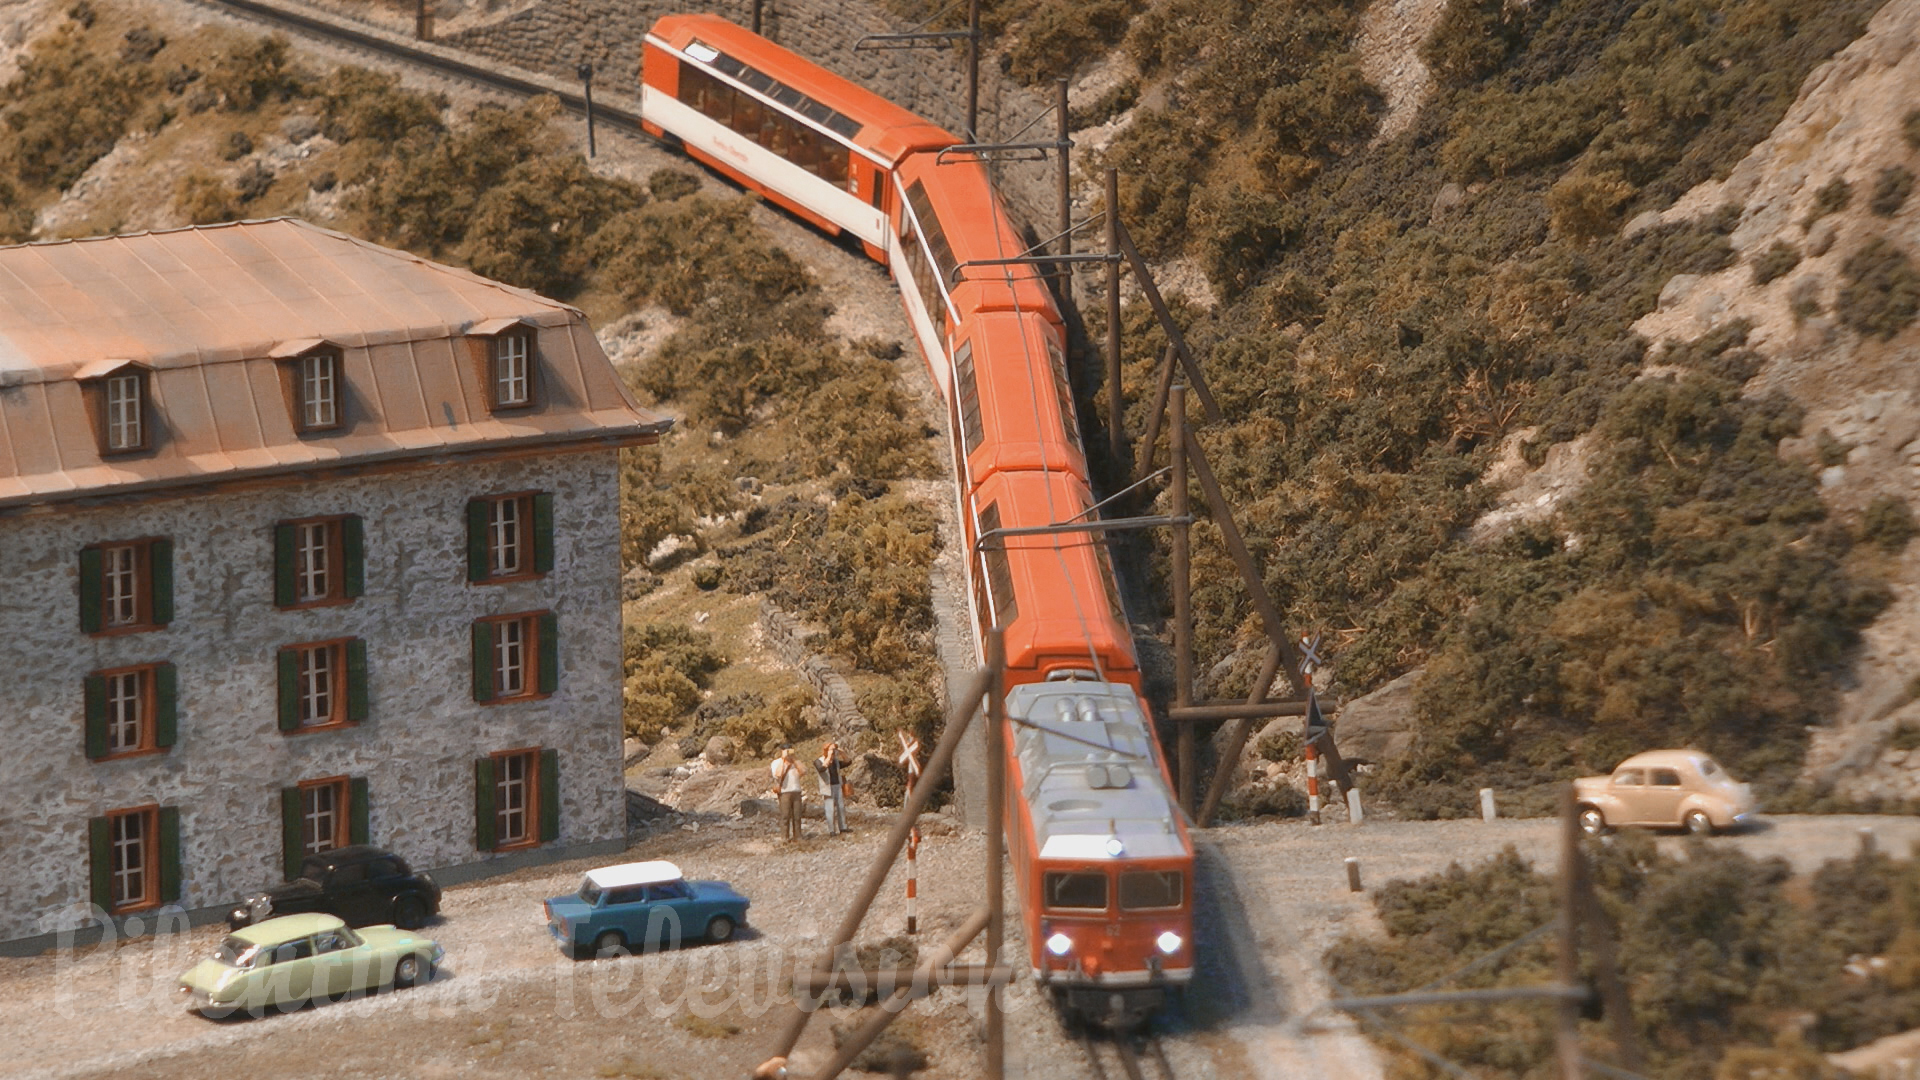 Model trains in action - One of the finest layouts of Switzerland in HO scale